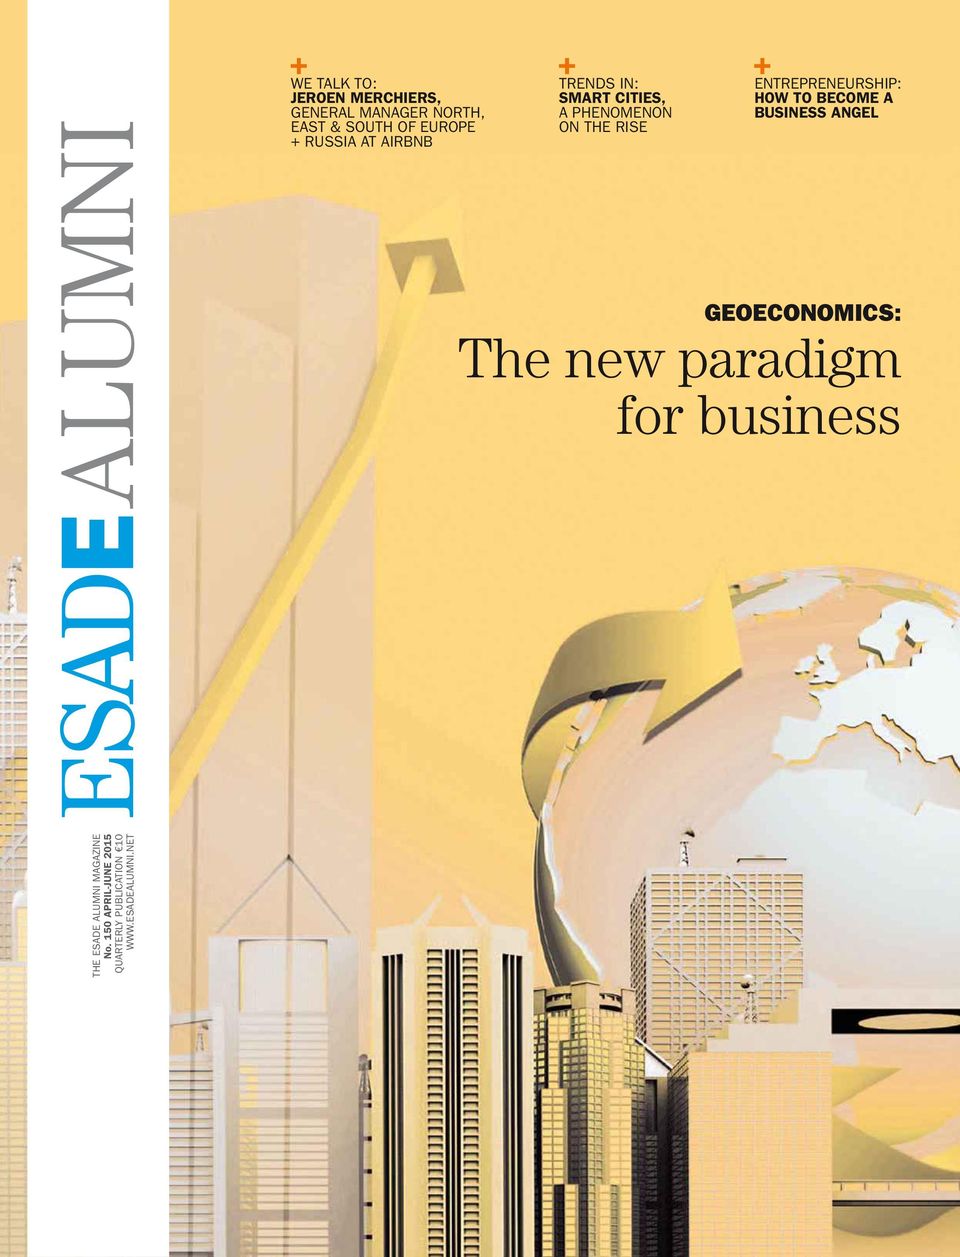 ENTREPRENEURSHIP: HOW TO BECOME A BUSINESS ANGEL GEOECONOMICS: The new paradigm